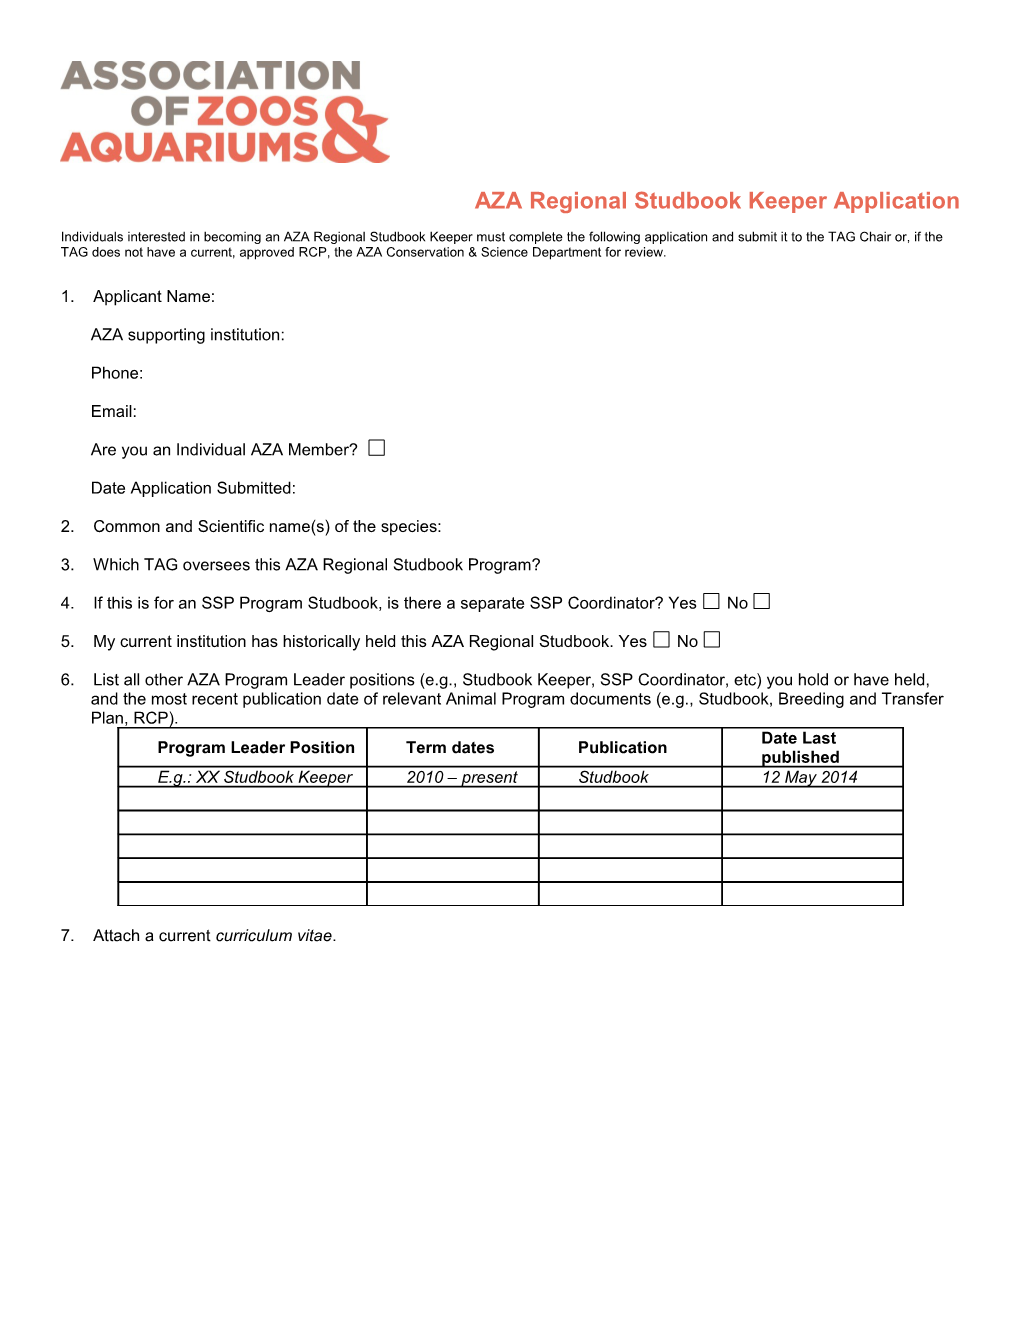 Application to Become an AZA Regional Studbook Keeper